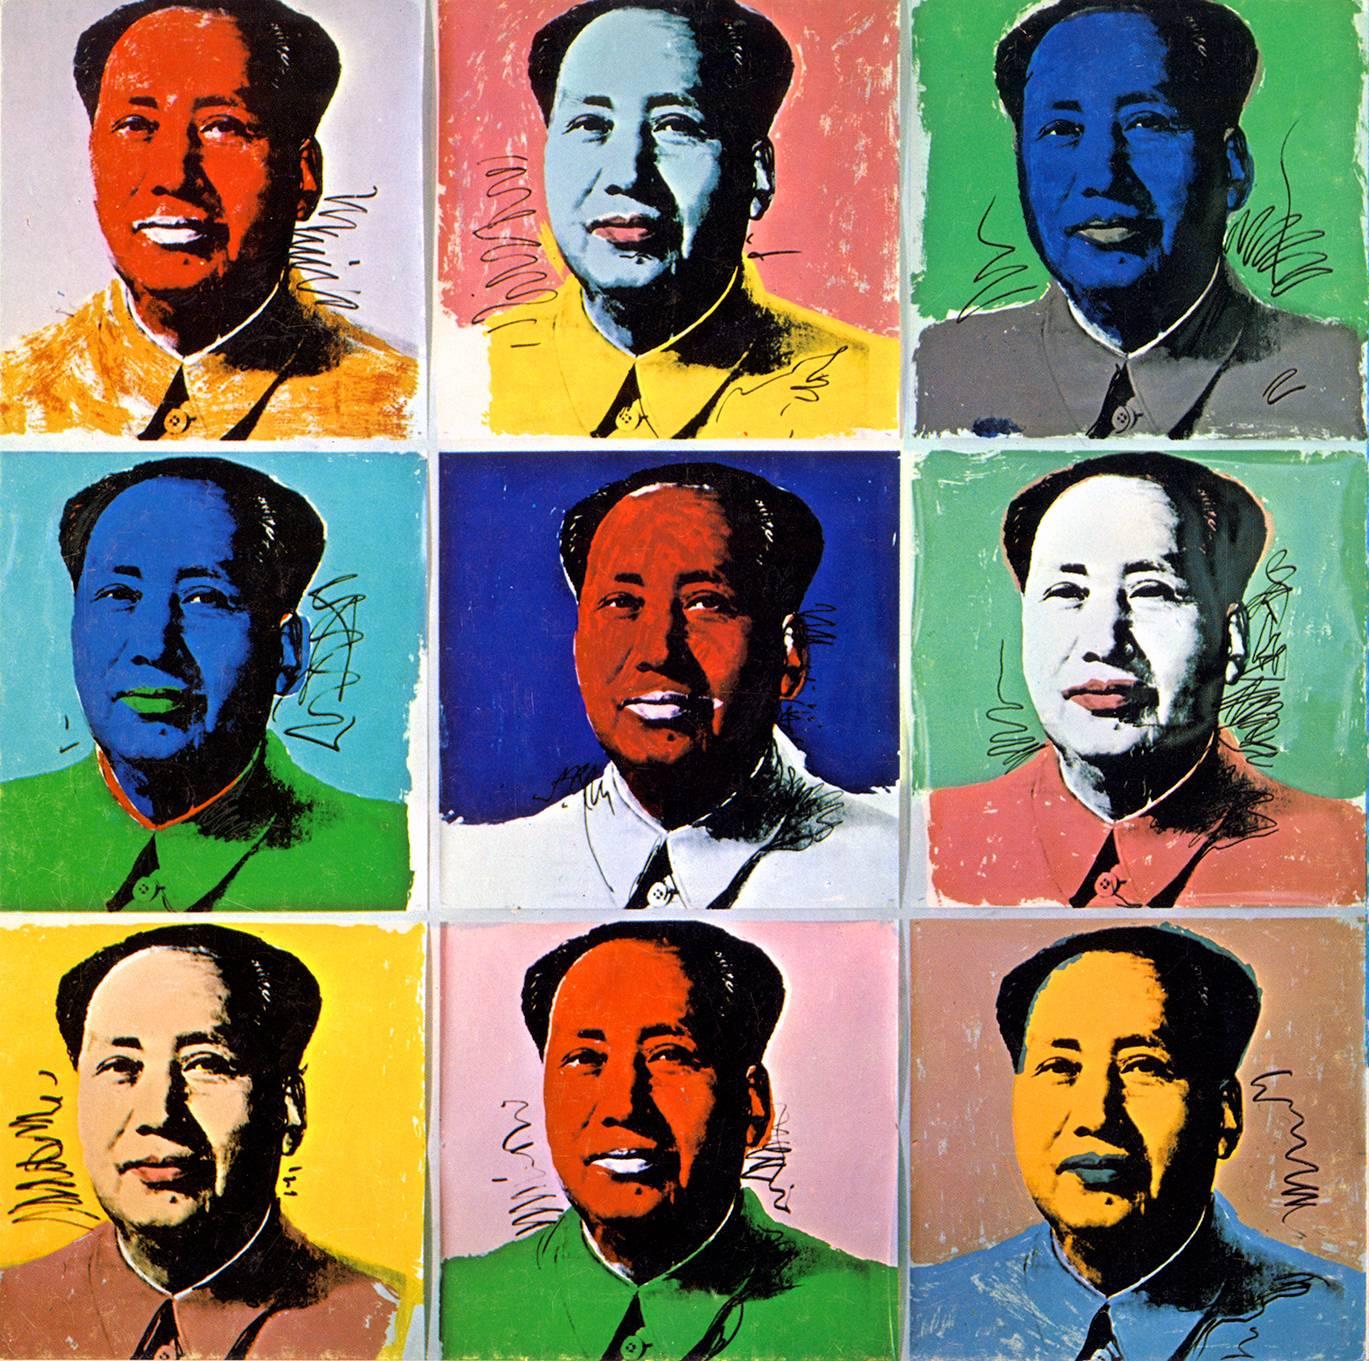 Andy Warhol Mao announcement 1972 (Warhol at Leo Castelli)  - Print by (after) Andy Warhol